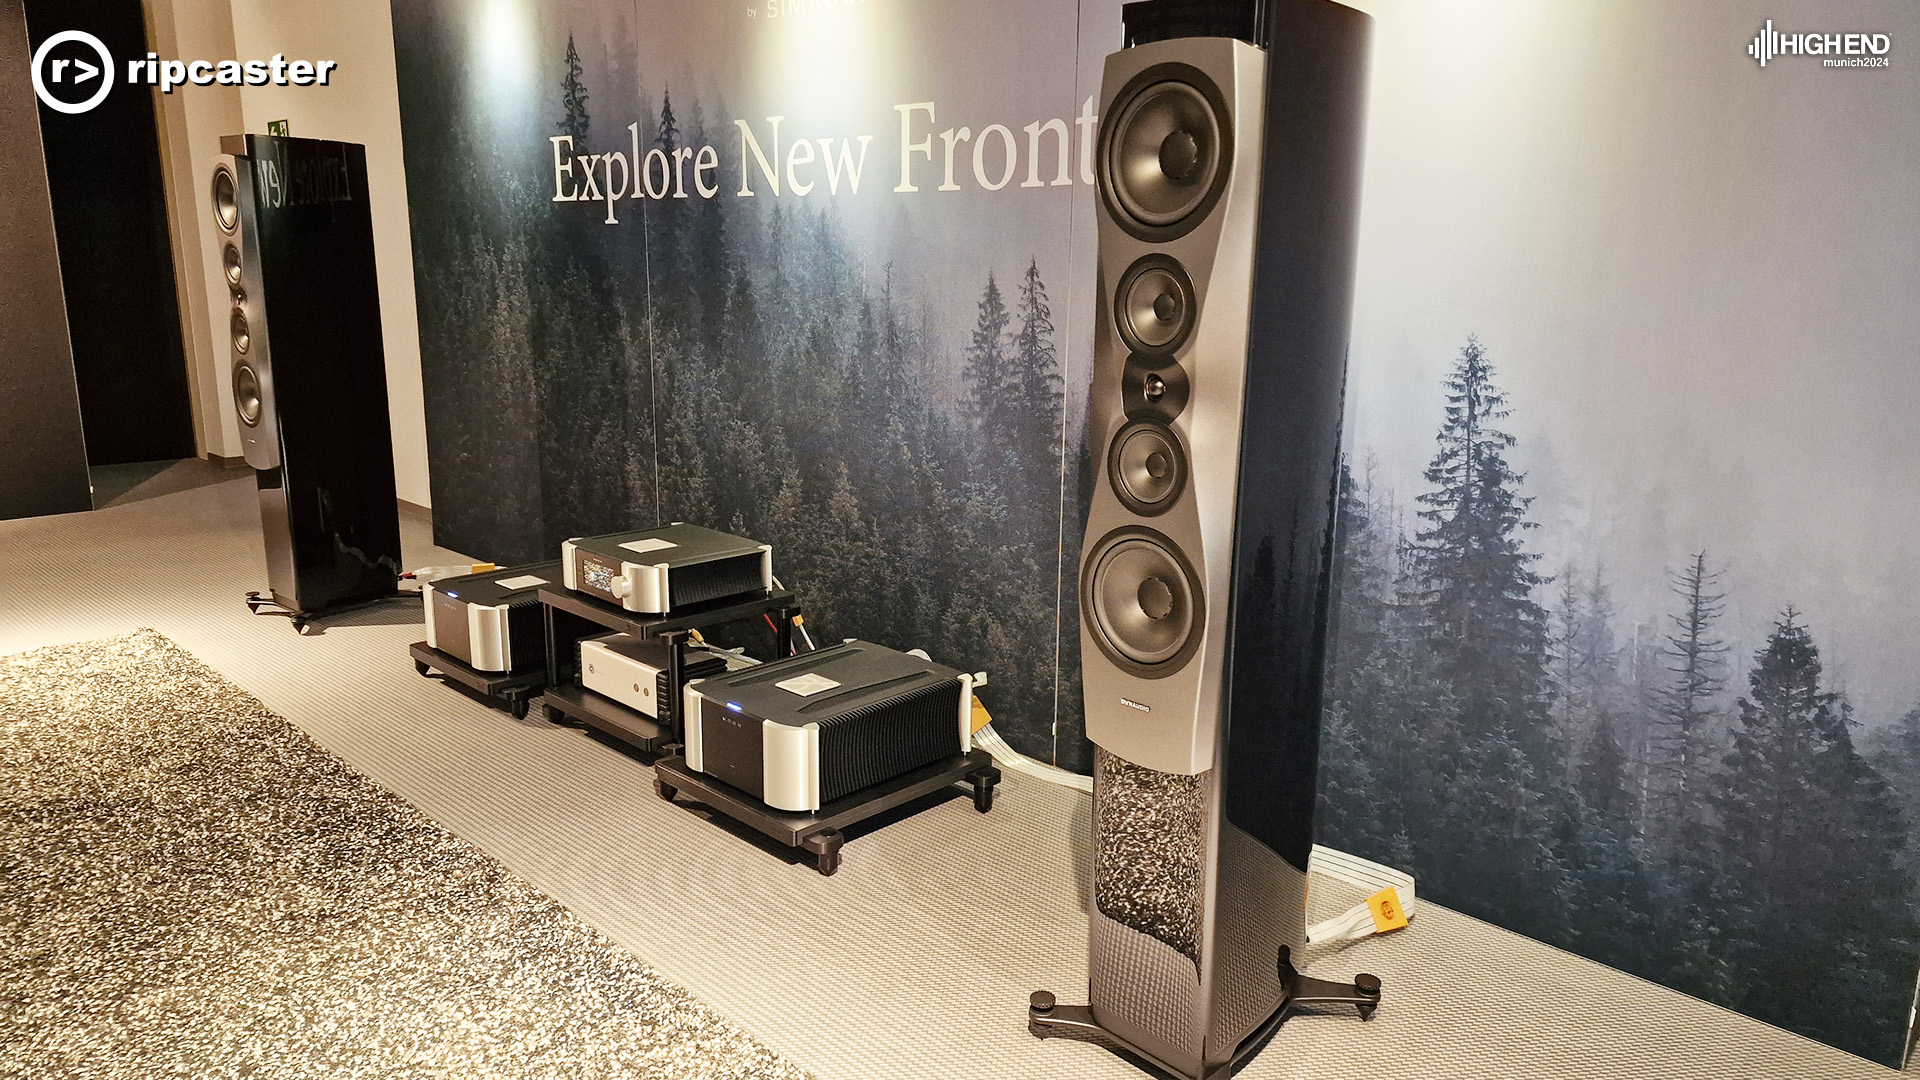 MOON  equipment between two large floorstanding speakers.  The backdrop is a forest with the words "explore new frontiers"